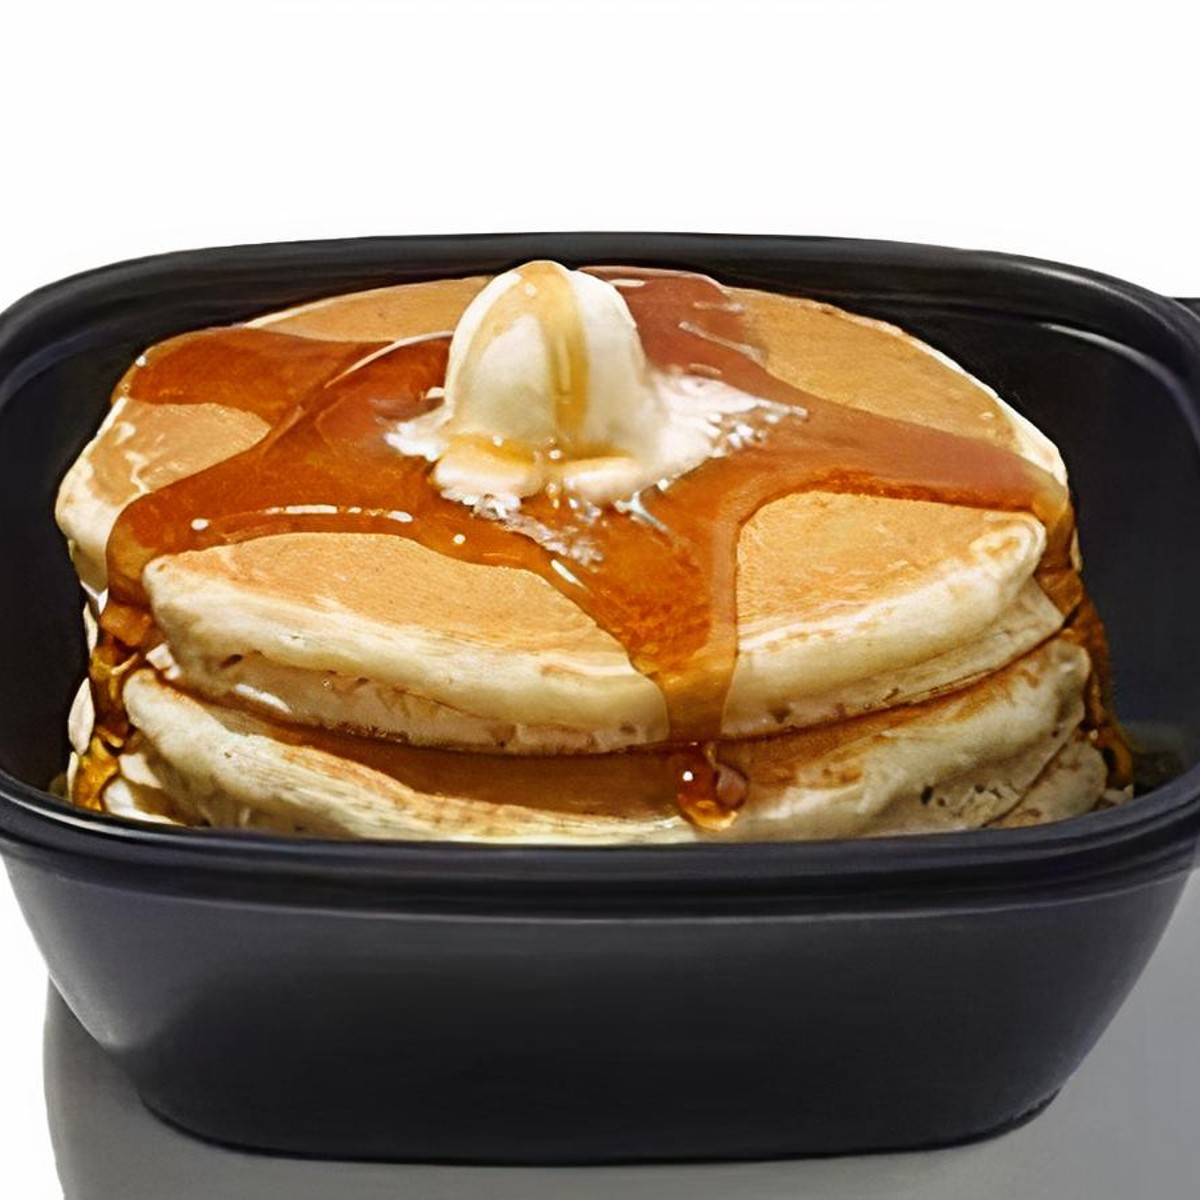 IHOP Launches Flip'd, Chain Selling Takeout Pancake Bowls